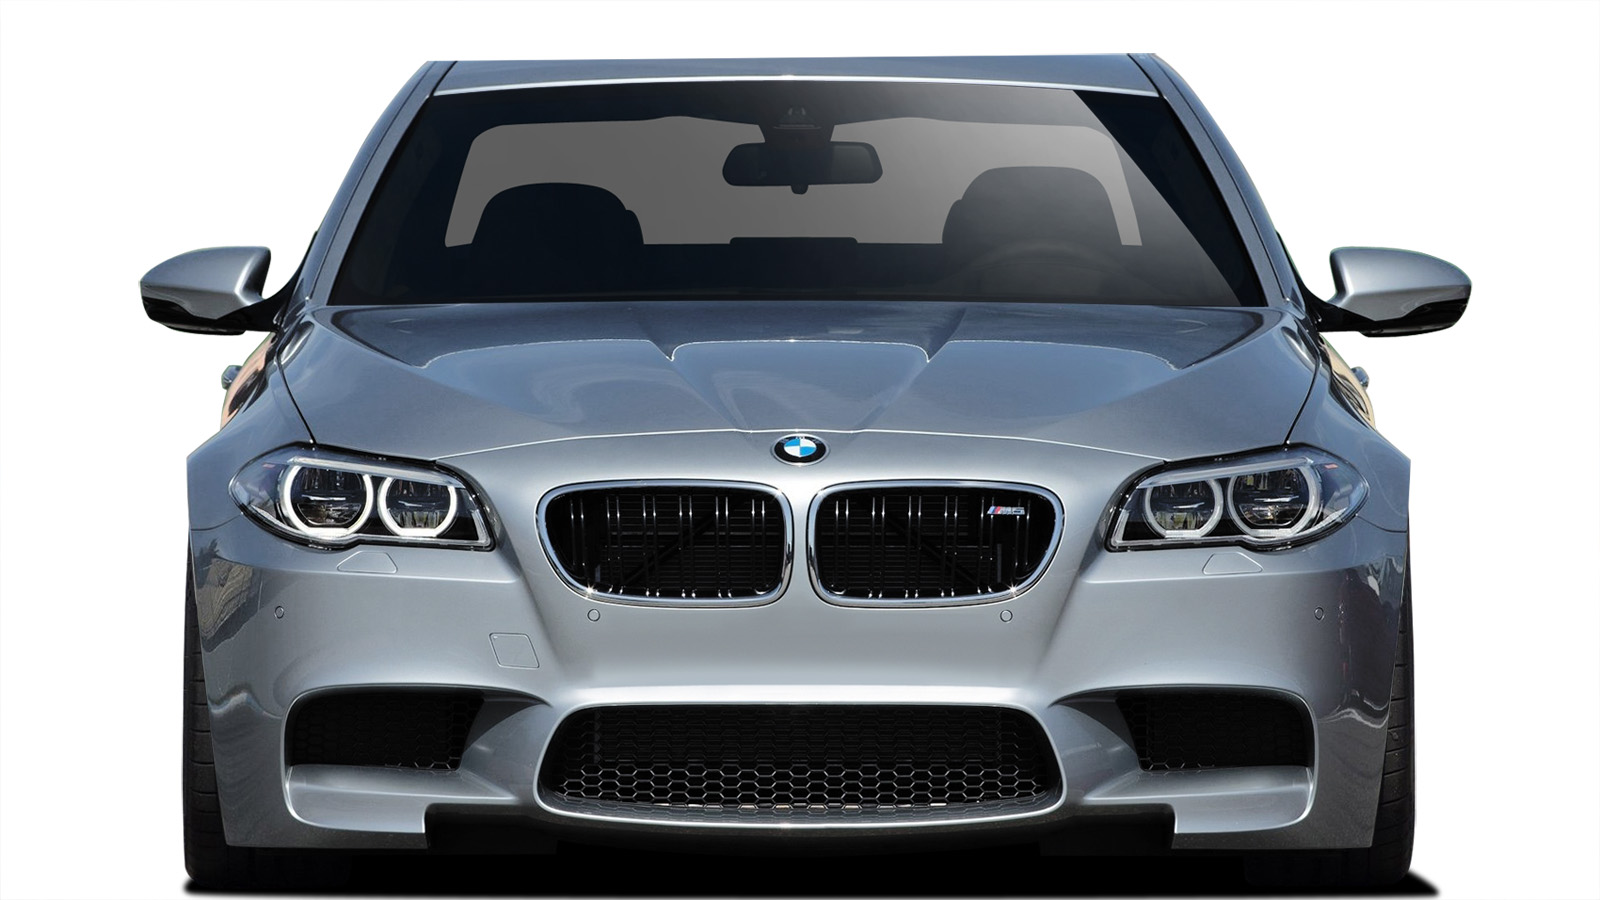 2016 BMW 5 Series ALL Front Bumper Bodykit - BMW 5 Series F10 Vaero M5 Look Conversion Front Bumper Cover ( with PDC , with Washer , with Camera